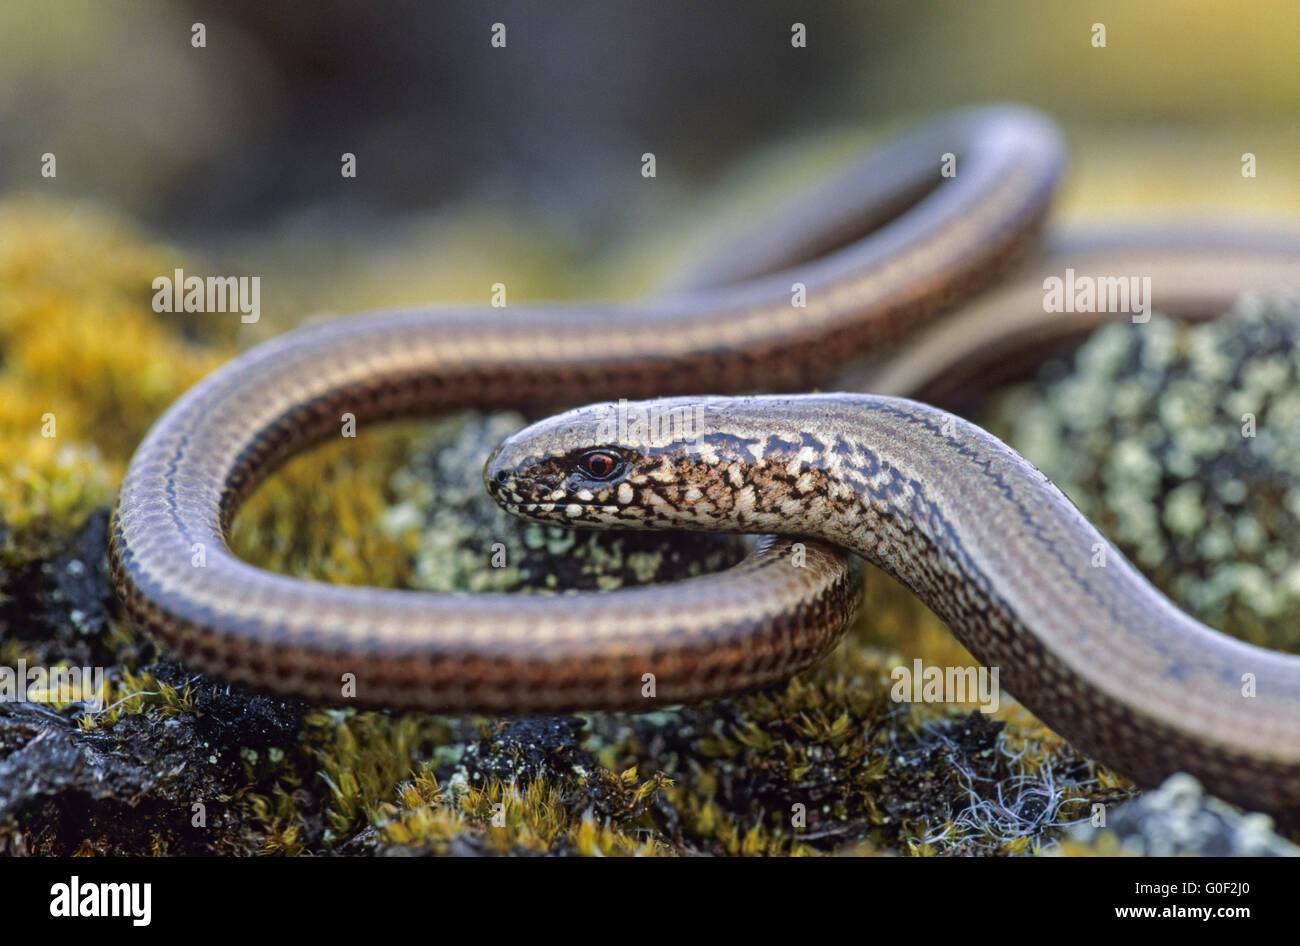 Slow Worm grow to be about 45cm long Stock Photo